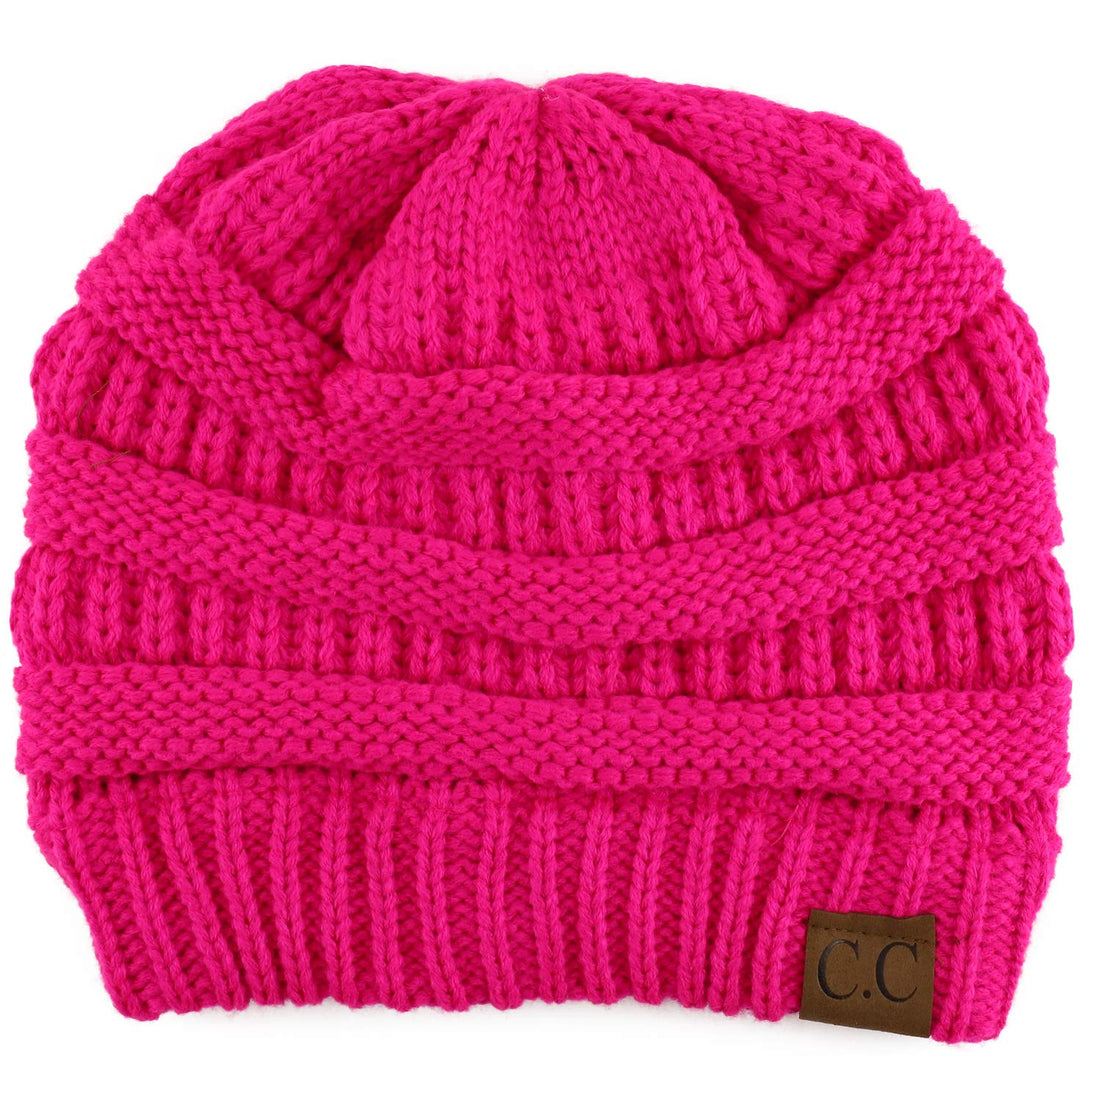 Trendy Apparel Shop Neon Color High Visibility Cable Knit Winter Beanie Hat